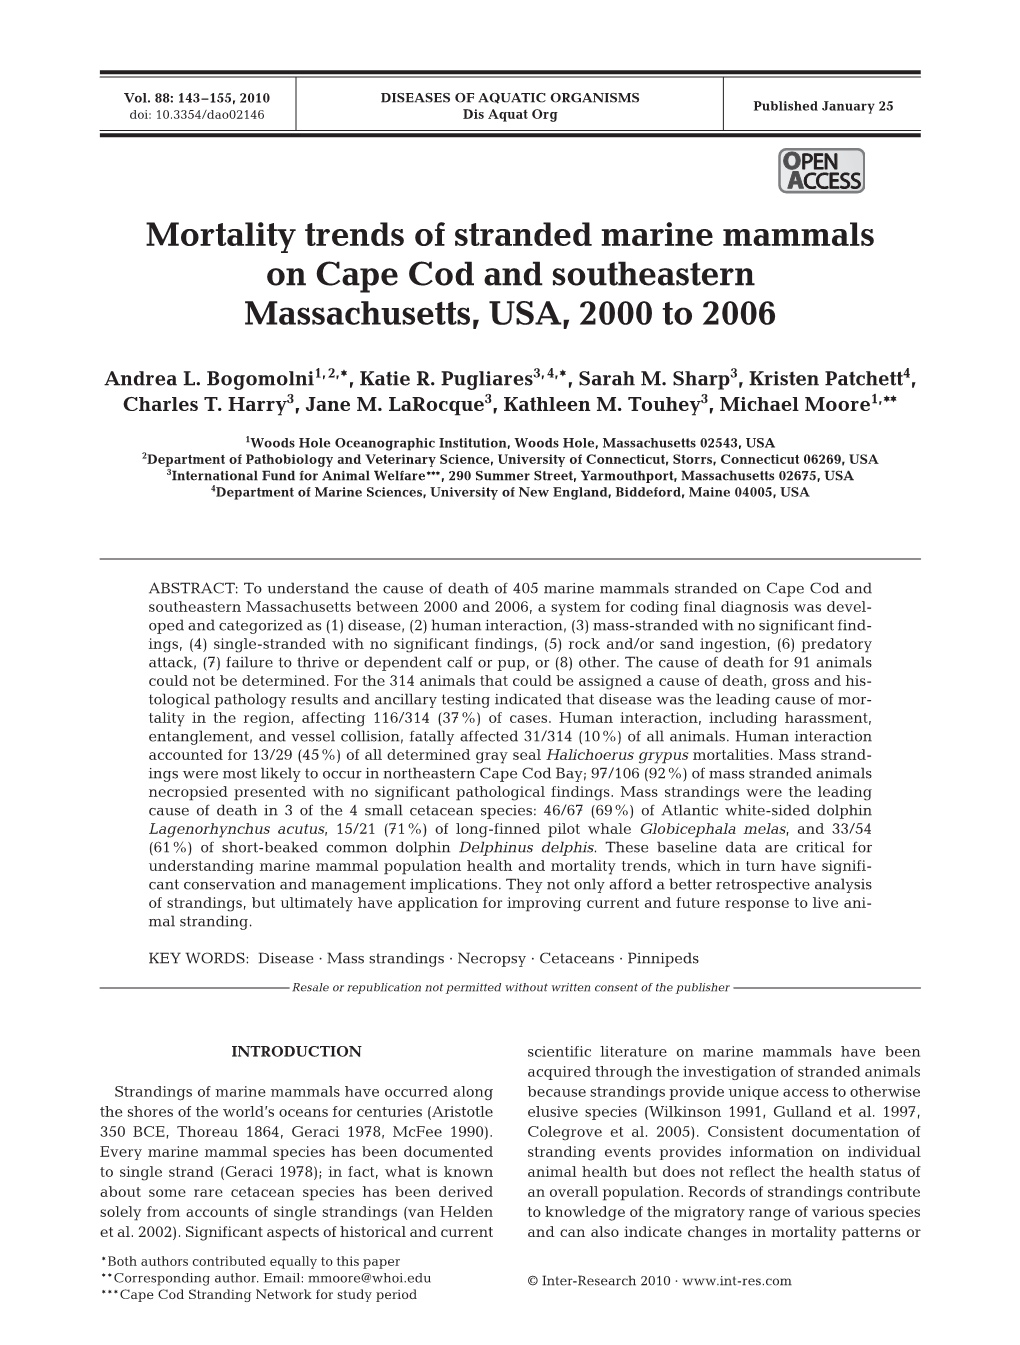 Mortality Trends of Stranded Marine Mammals on Cape Cod and Southeastern Massachusetts, USA, 2000 to 2006